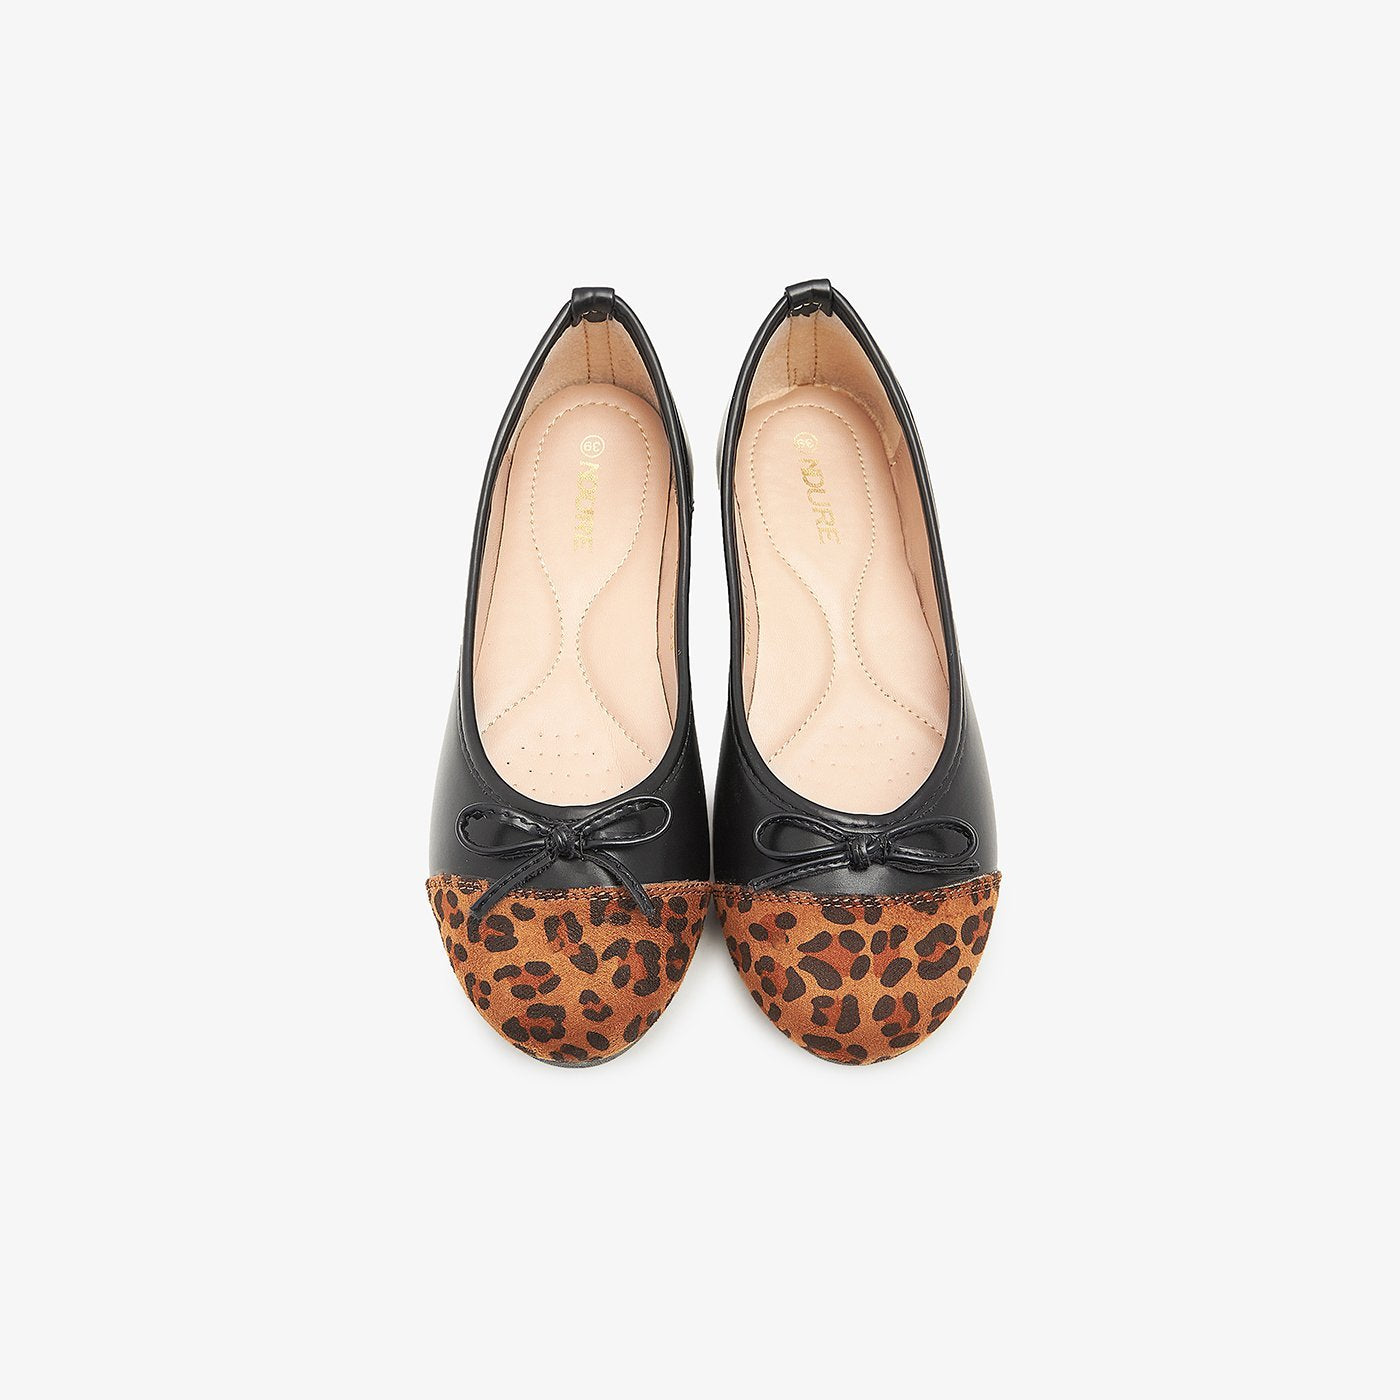 Sophisticated Pumps for Women